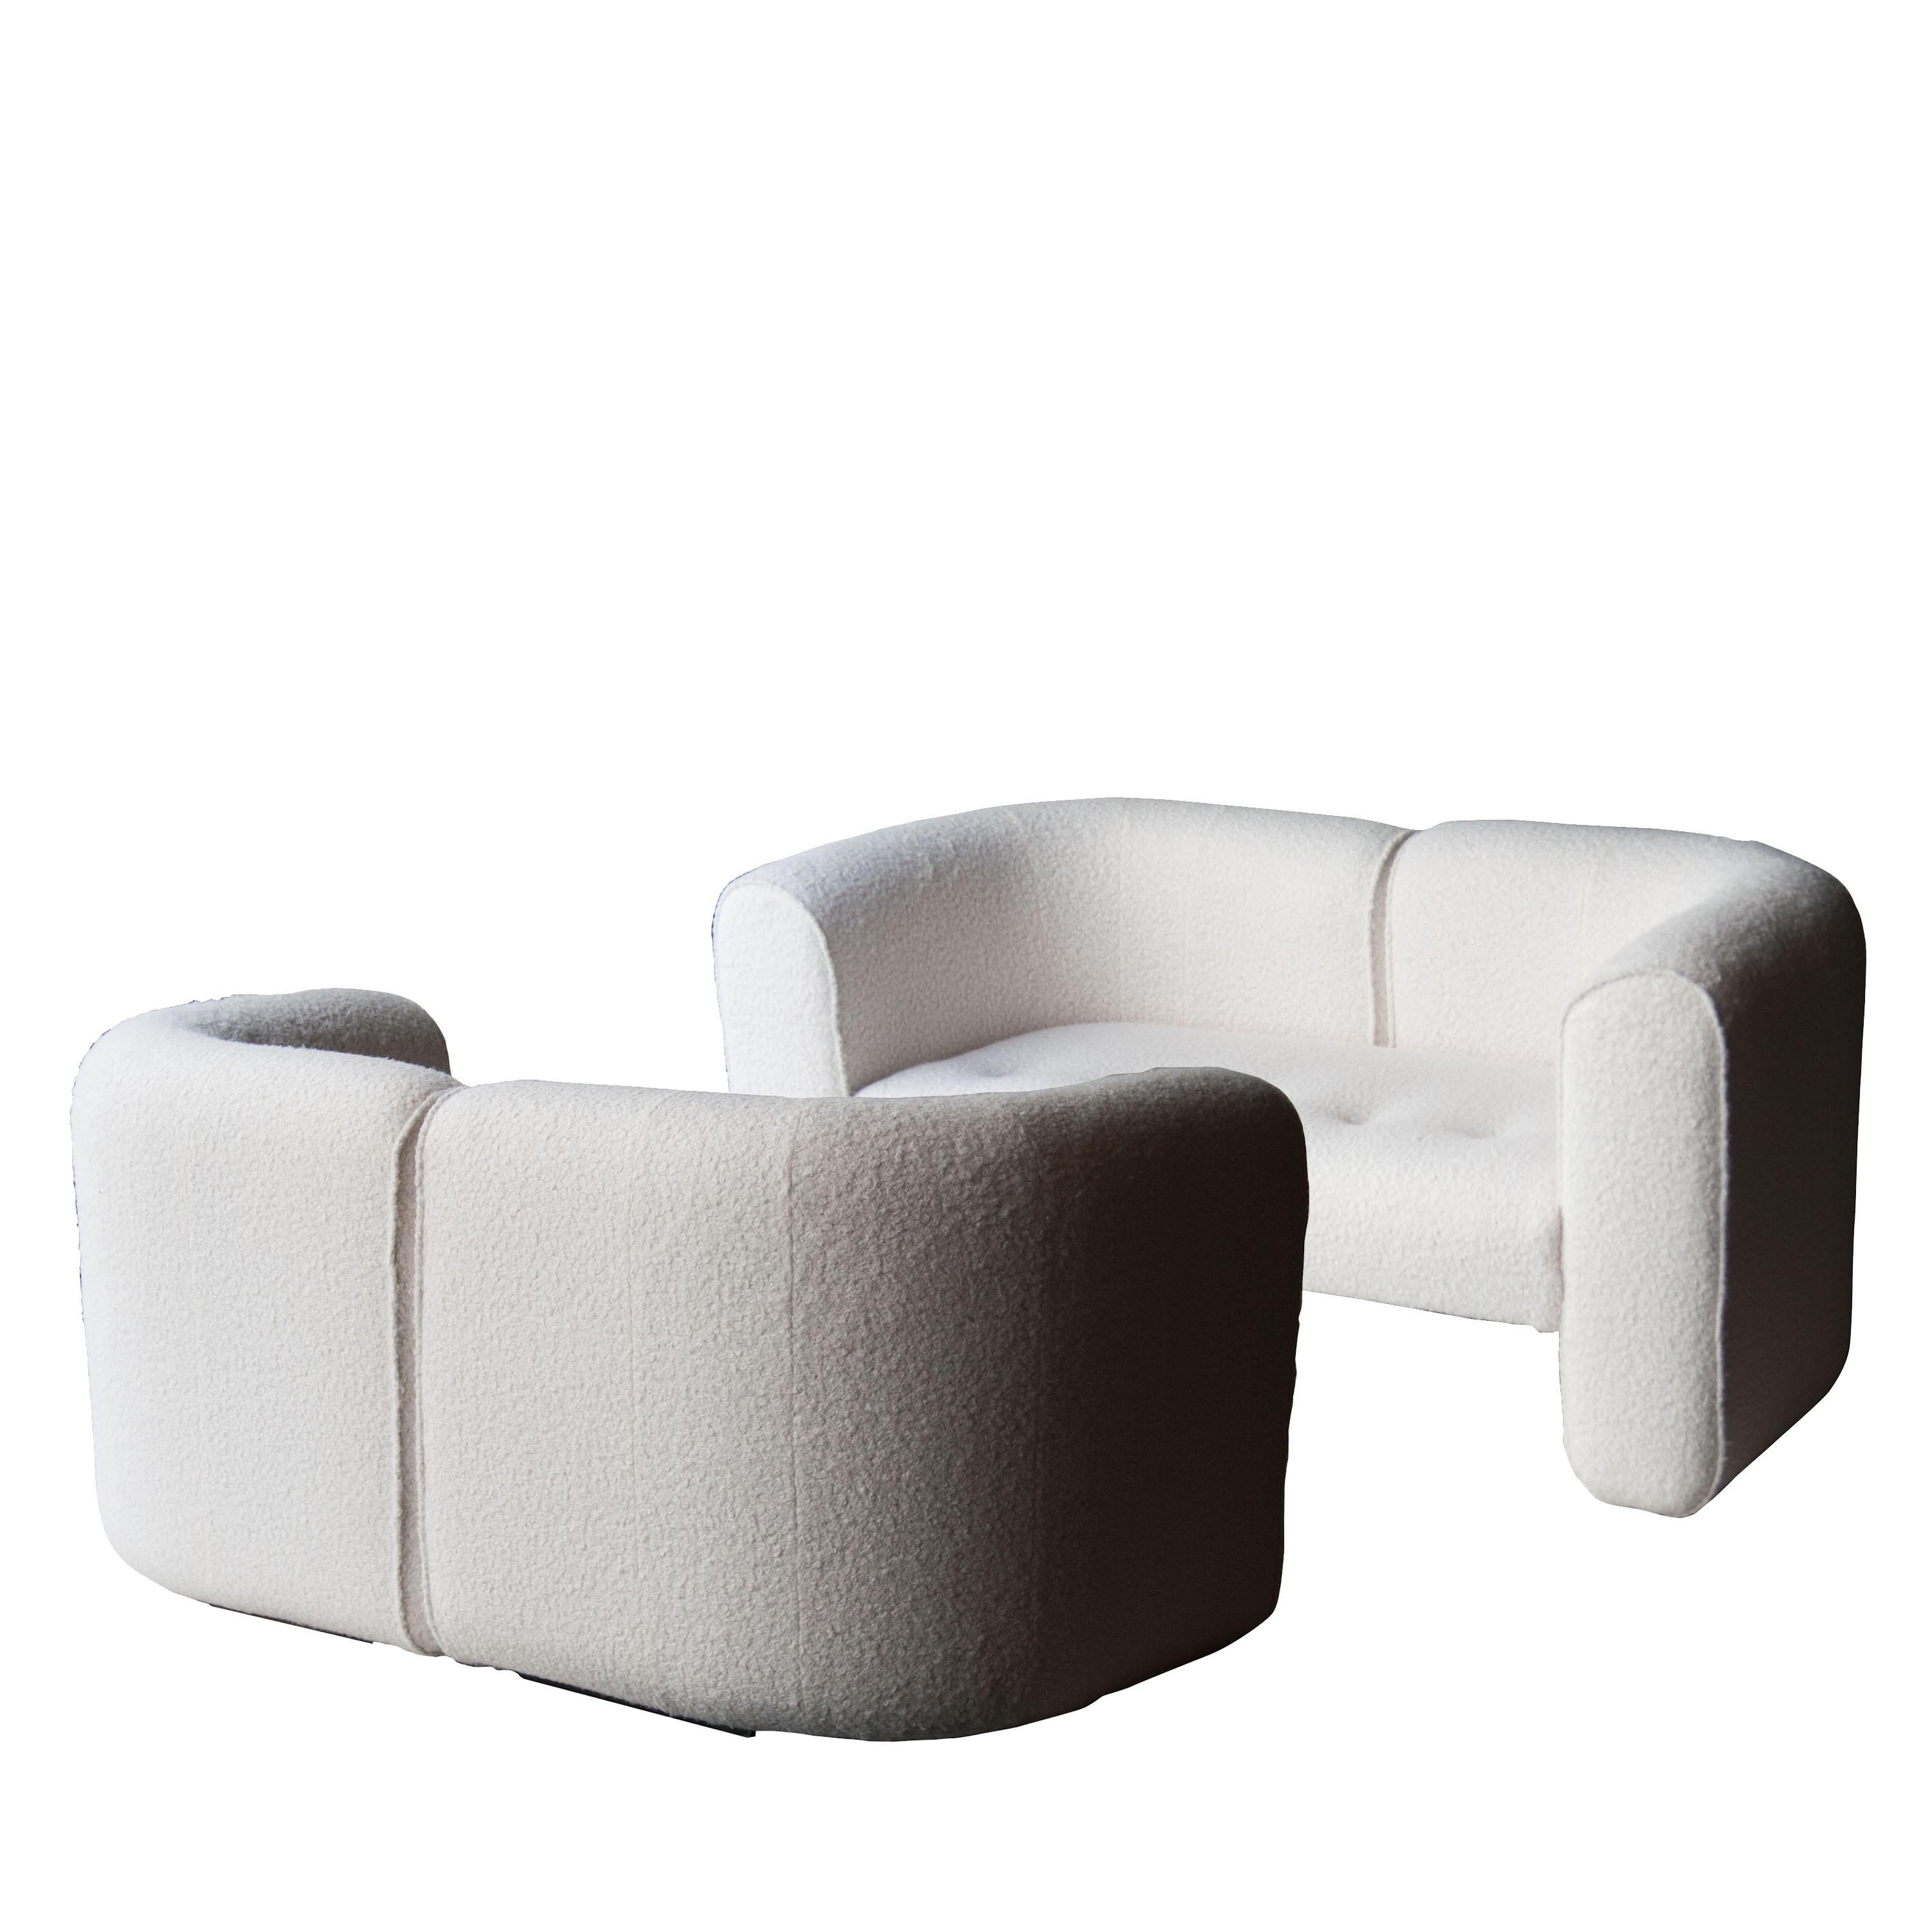 Pair of sofas with wooden structure upholstered in white wool boucle, Sweden, 1970.